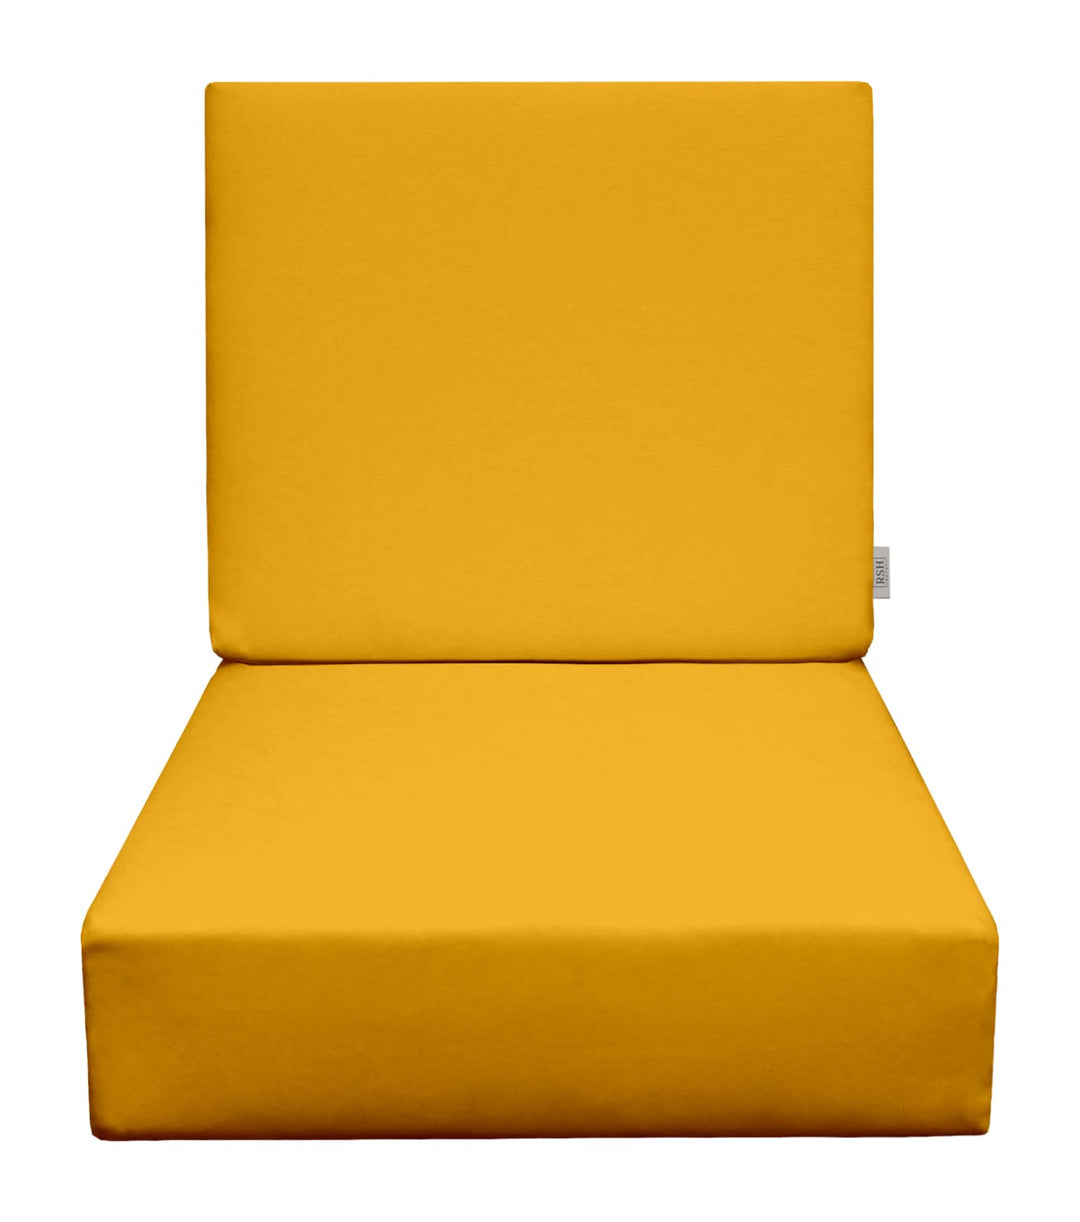 Rsh dcor Indoor Outdoor Sunbrella Deep Seating Cushion Set, 23x 24 x 5 Seat and 24 x 19 Back, Canvas Buttercup, Yellow